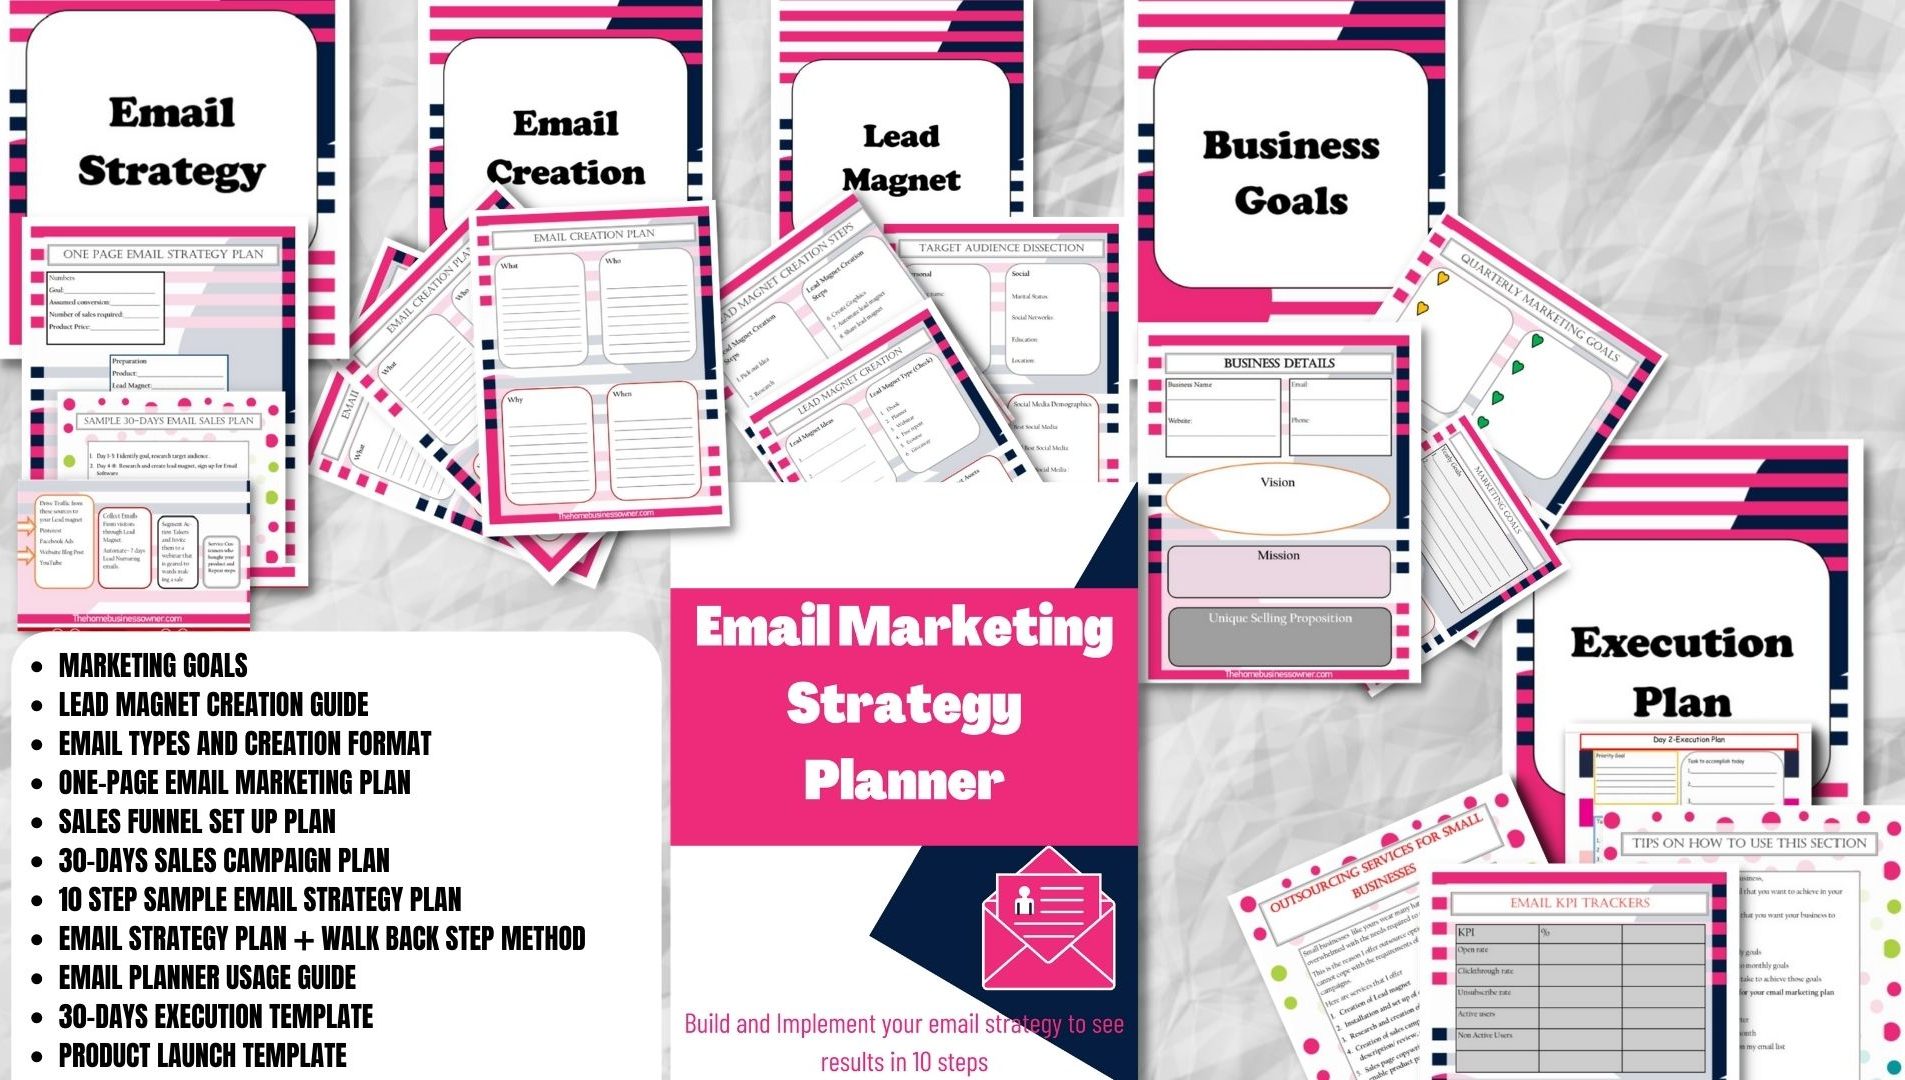 Email Marketing Strategy Planner